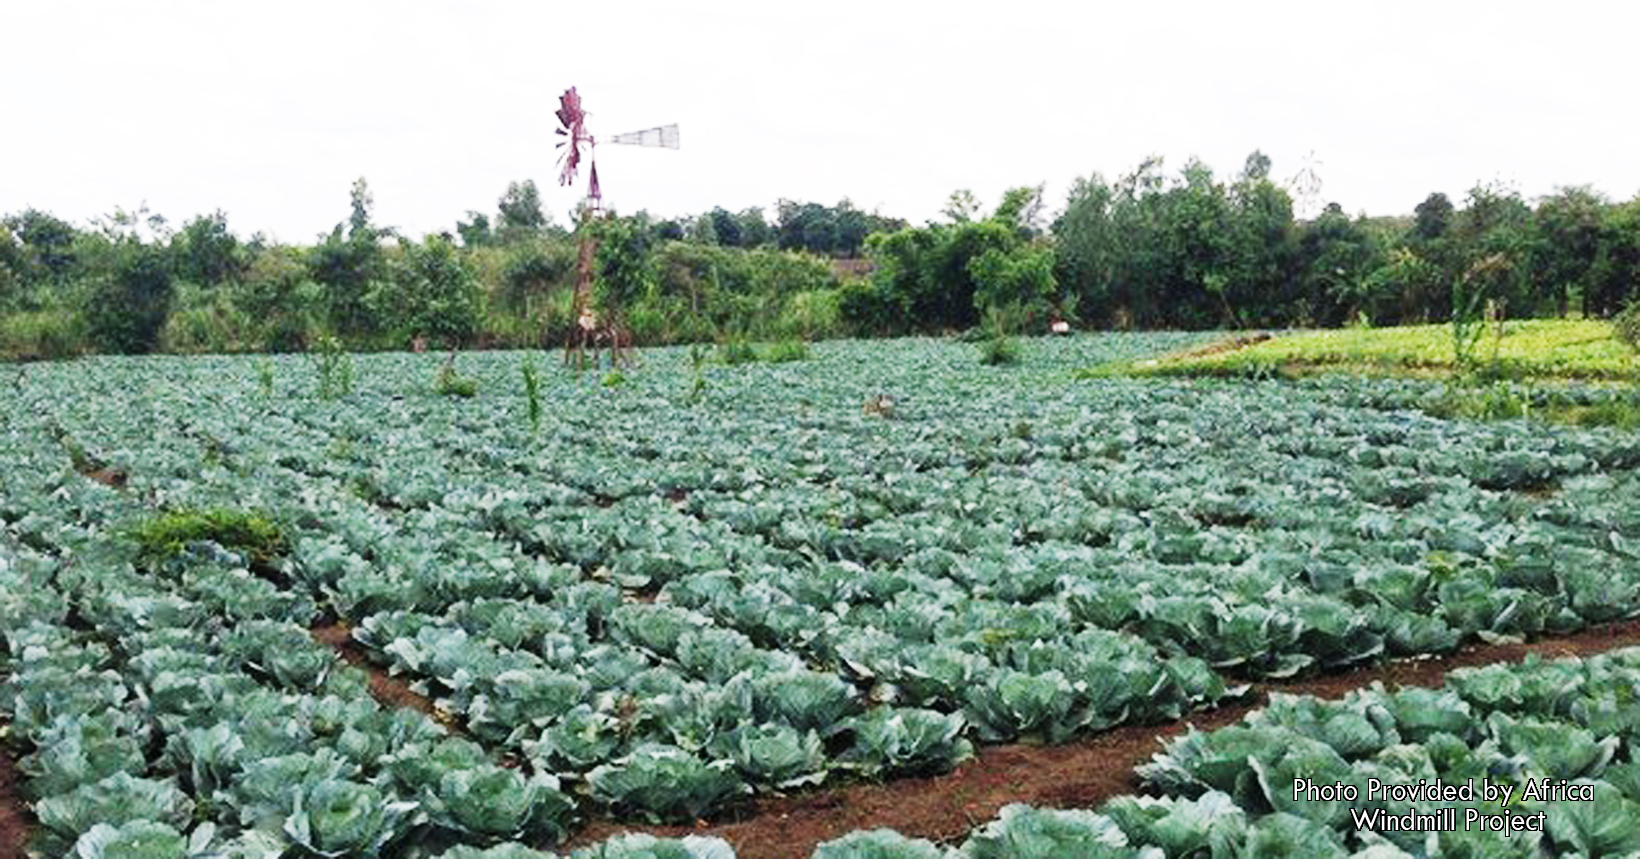 A small snapshot of a field in Malawi. Small holder farmers are starting to start their own business to generate additional income for themselves.